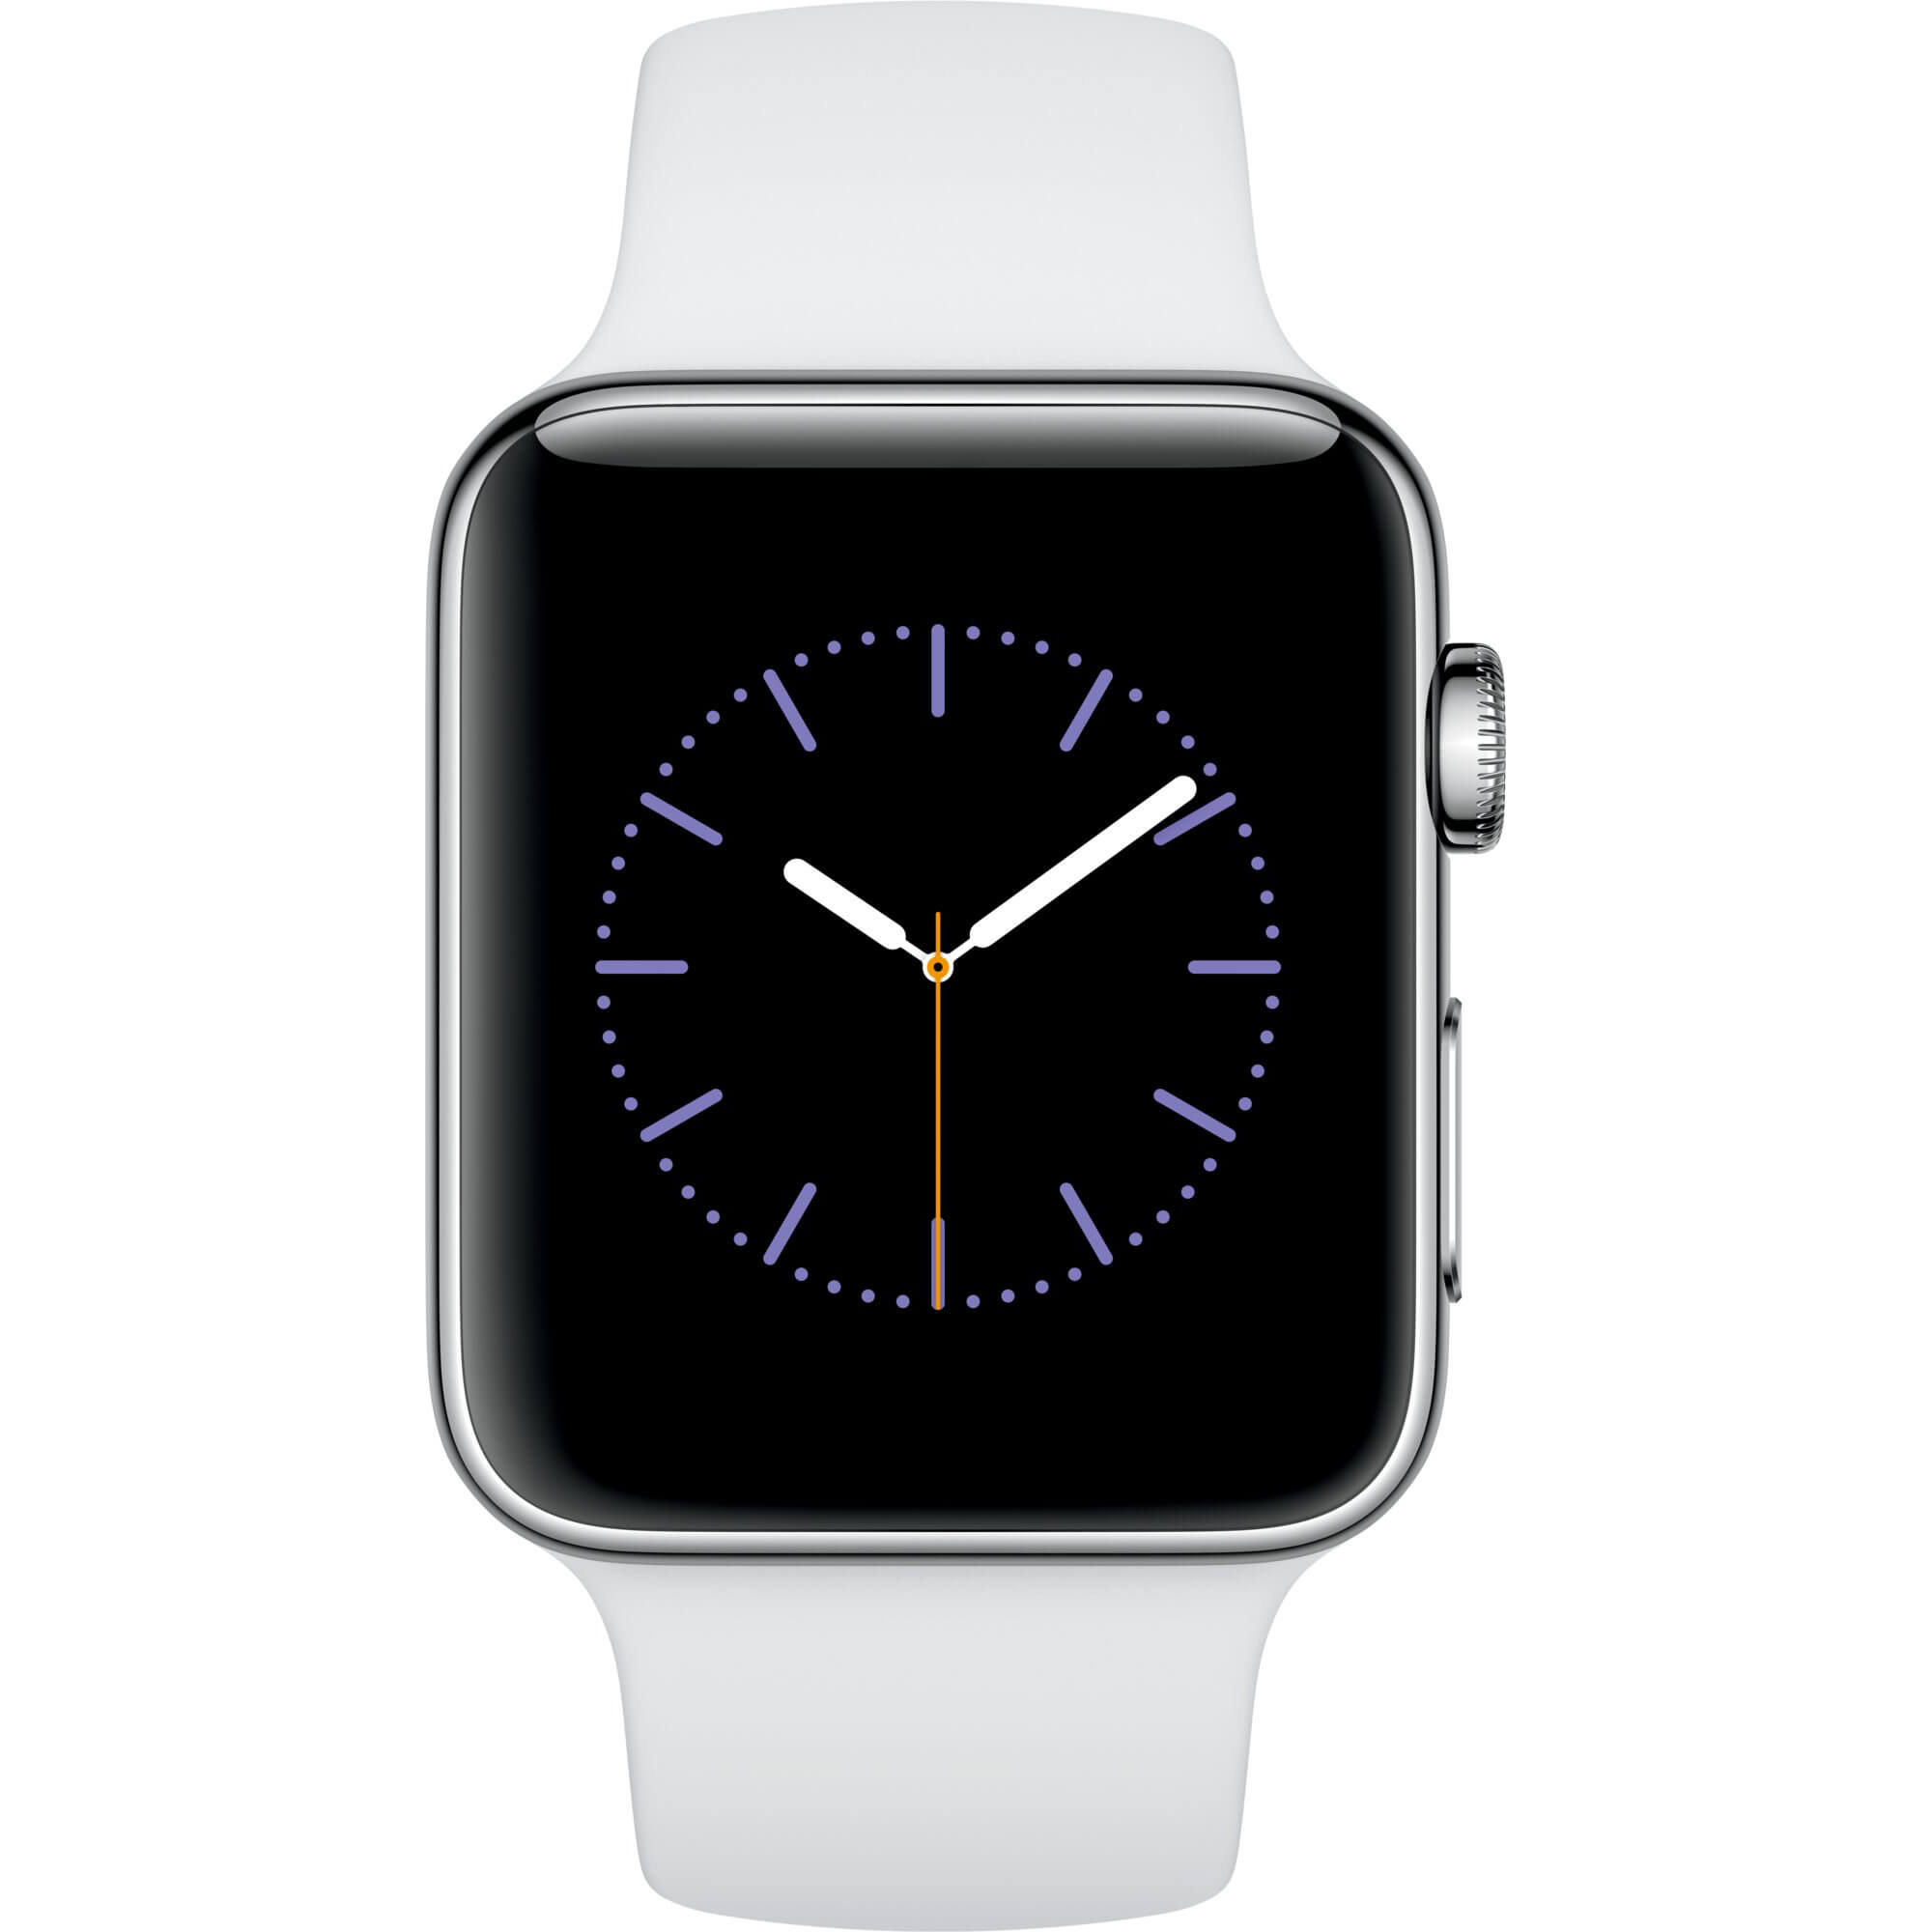  Apple Watch 2 42mm Stainless Steel Case, White Sport Band 